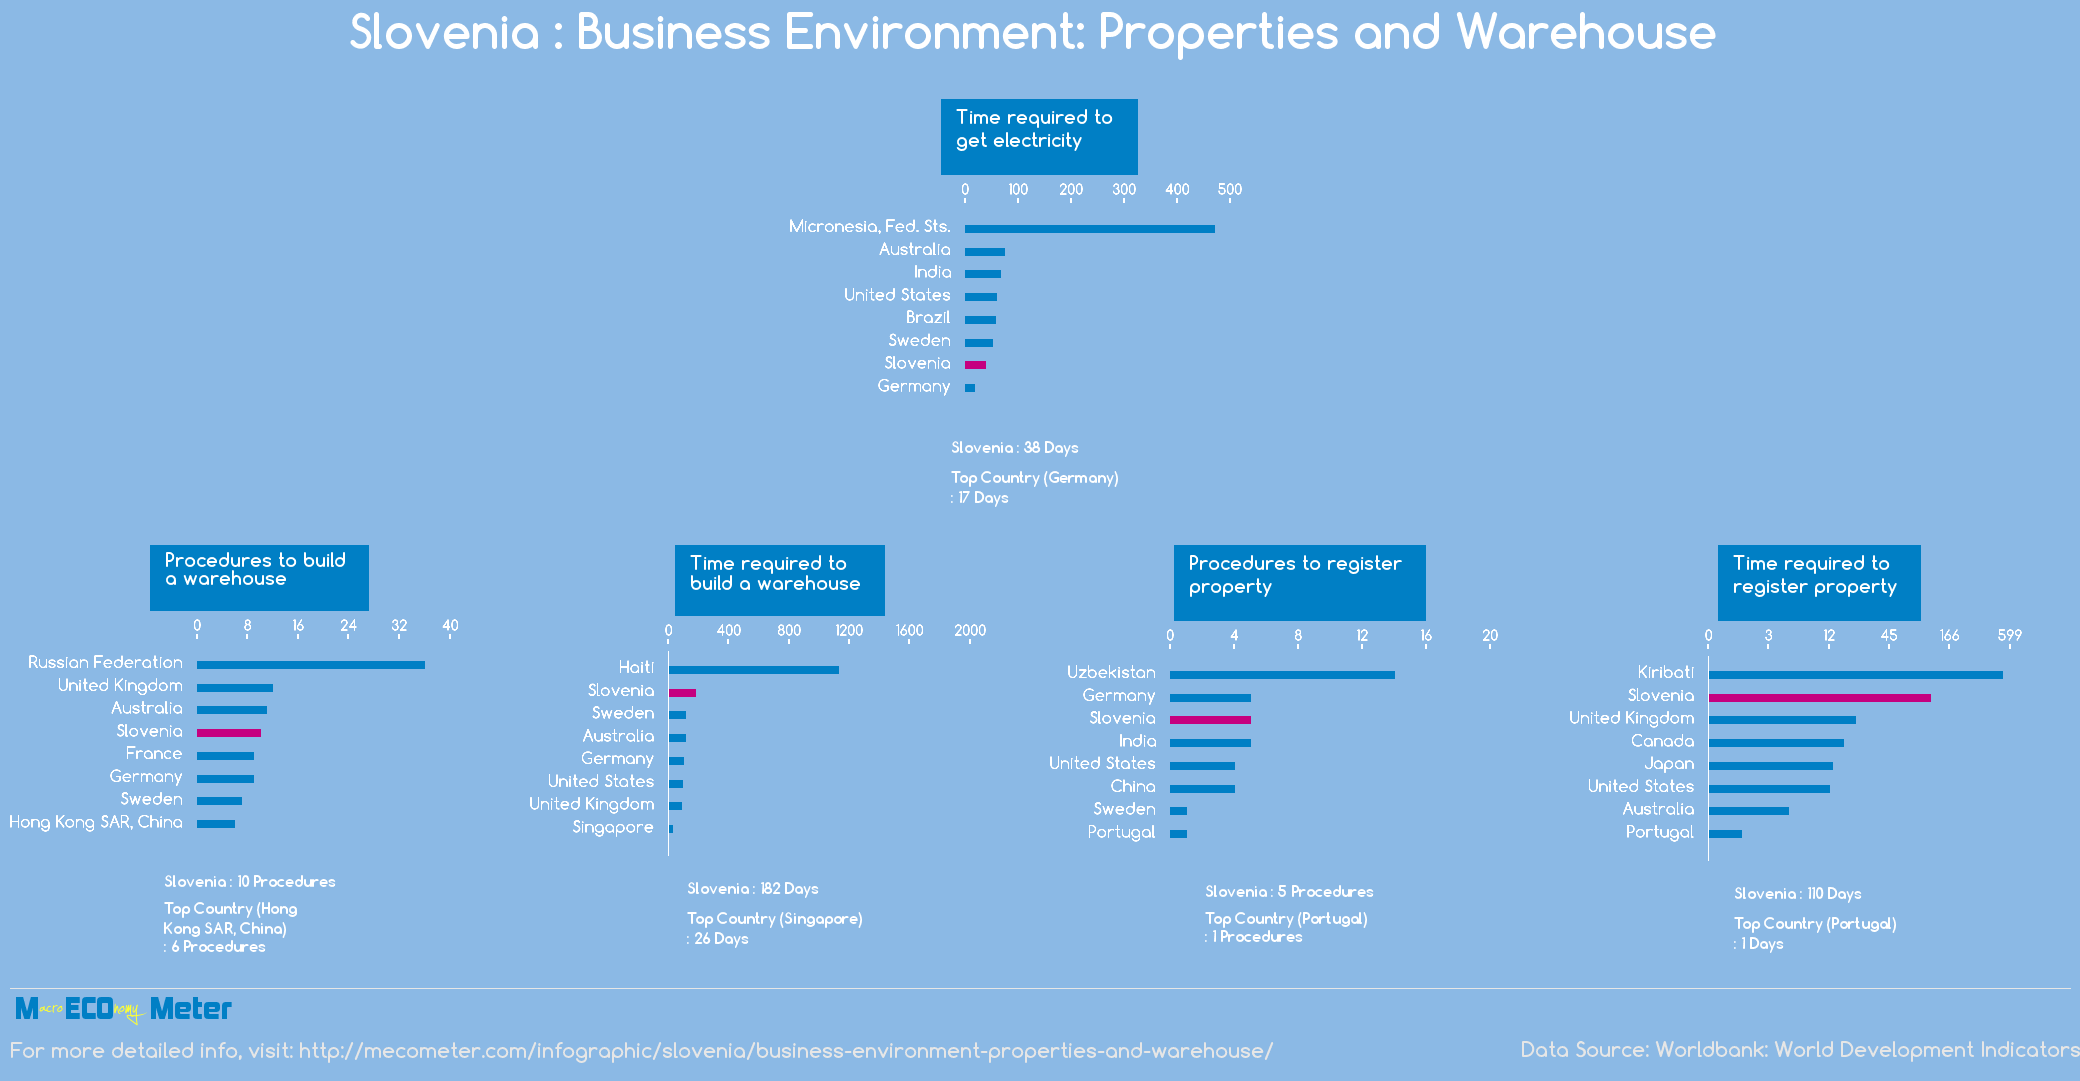 Slovenia : Business Environment: Properties and Warehouse 